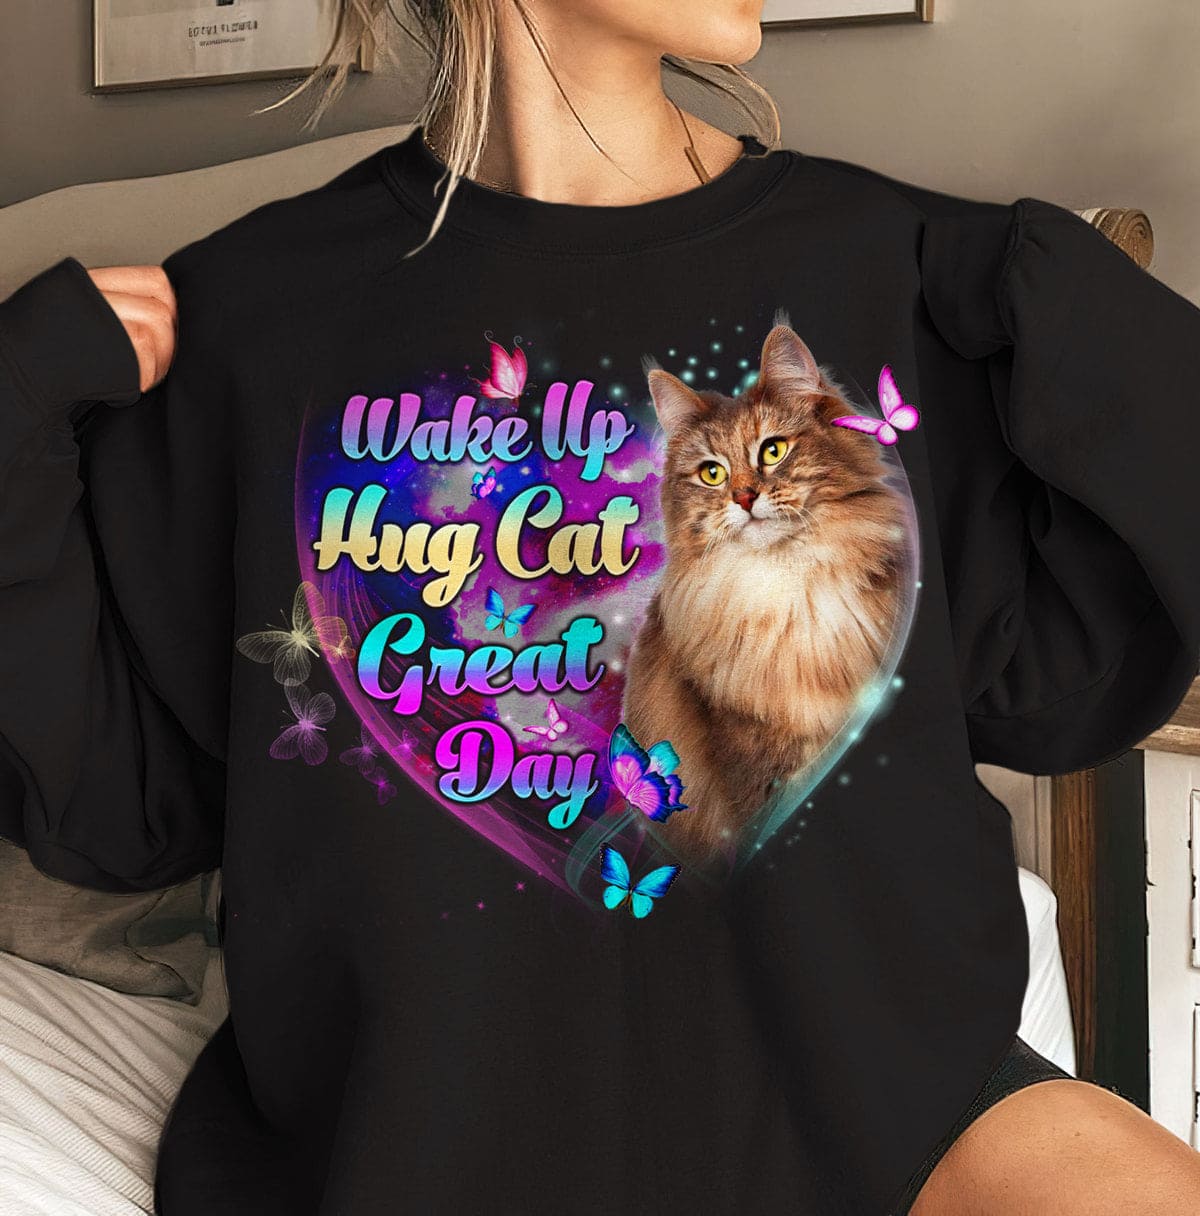 Wake up, hug cat, great day - Gift for cat person, Norwegian Forest cat